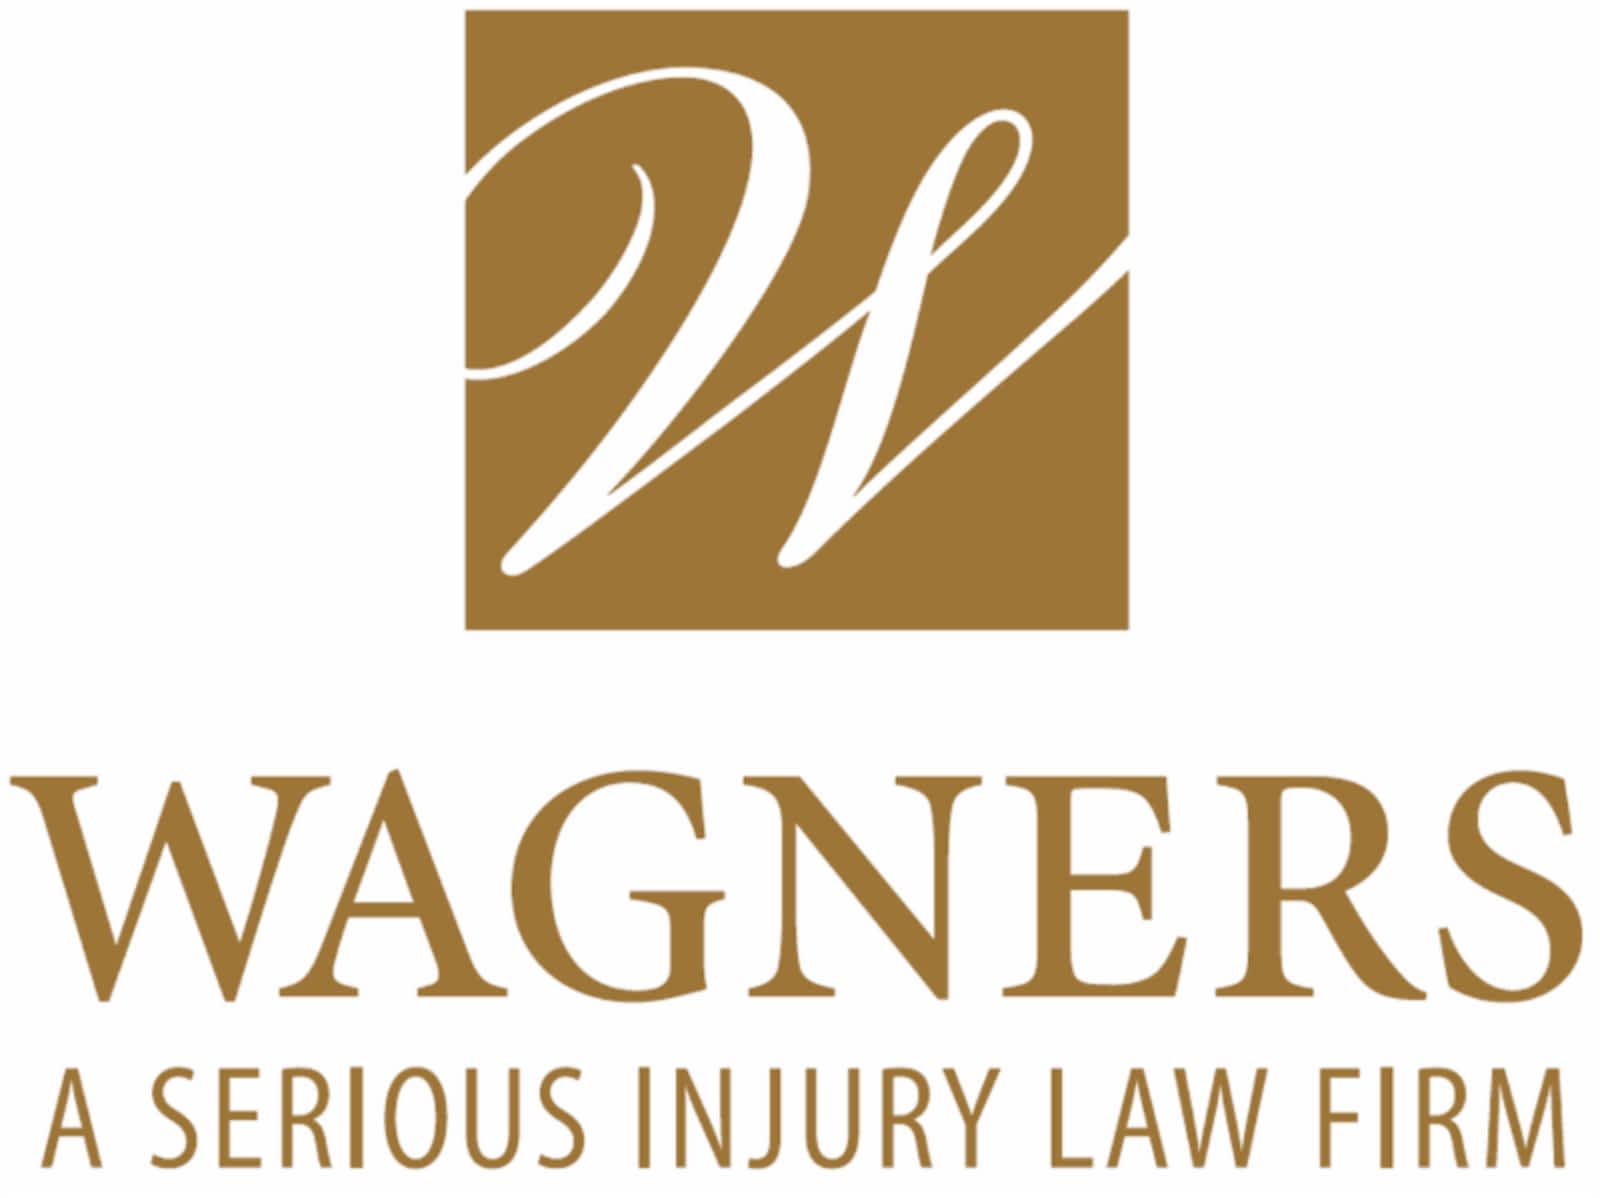 Wagners Law Firm | Personal Injury Lawyers